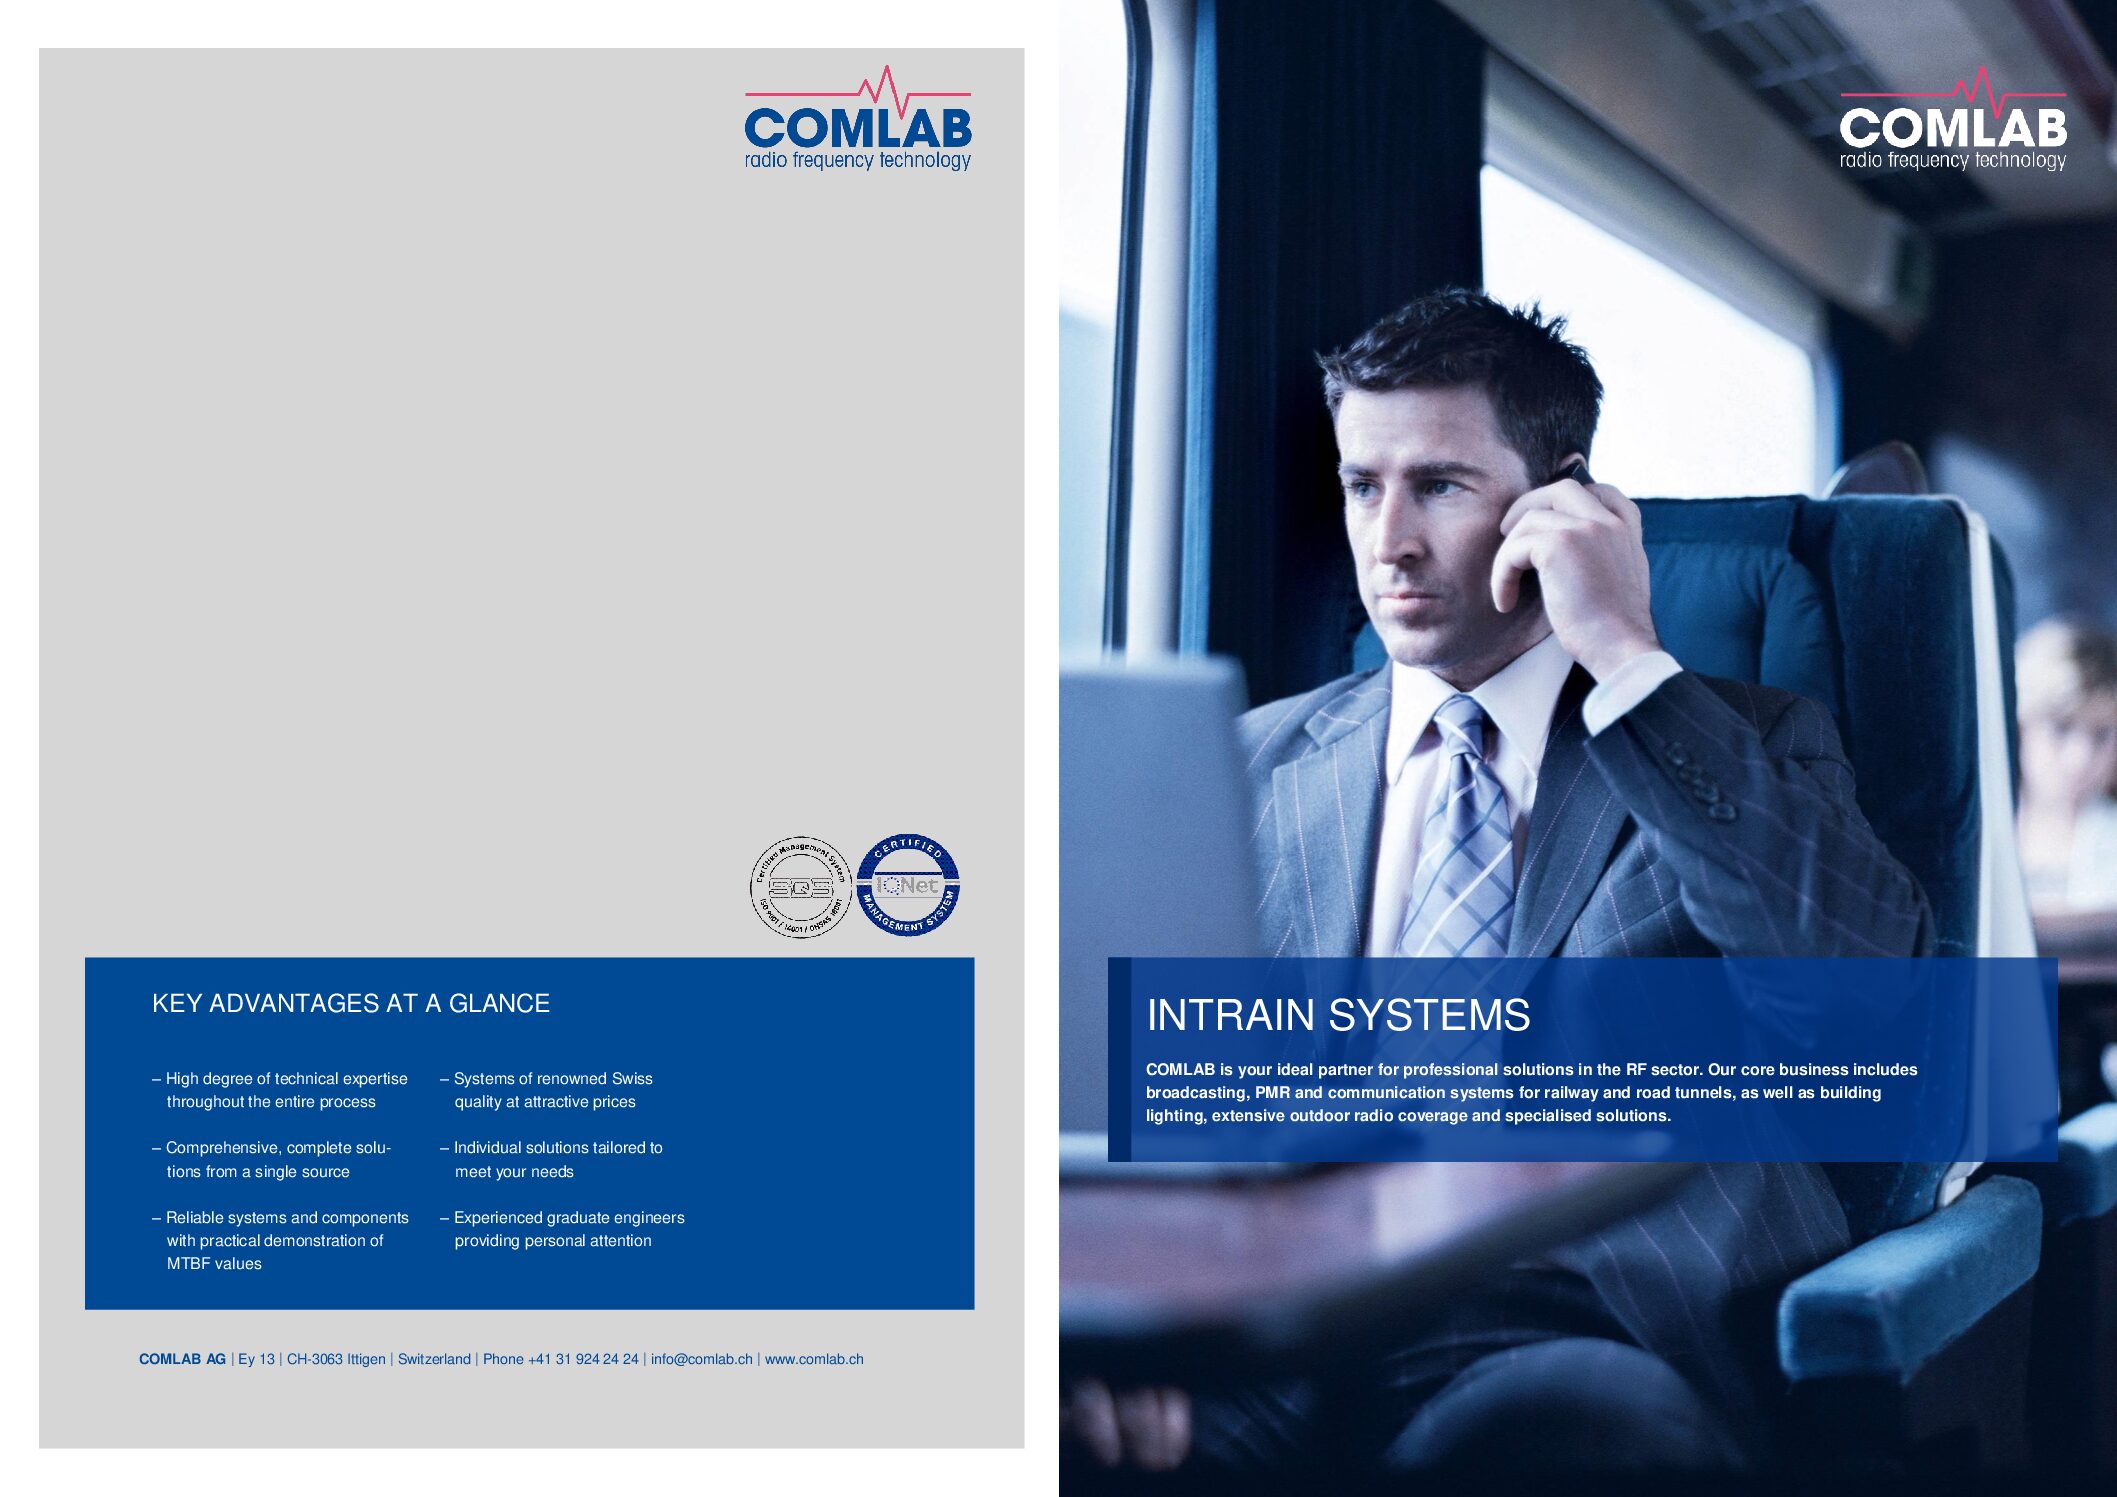 COMLAB In-Train Systems Brochure